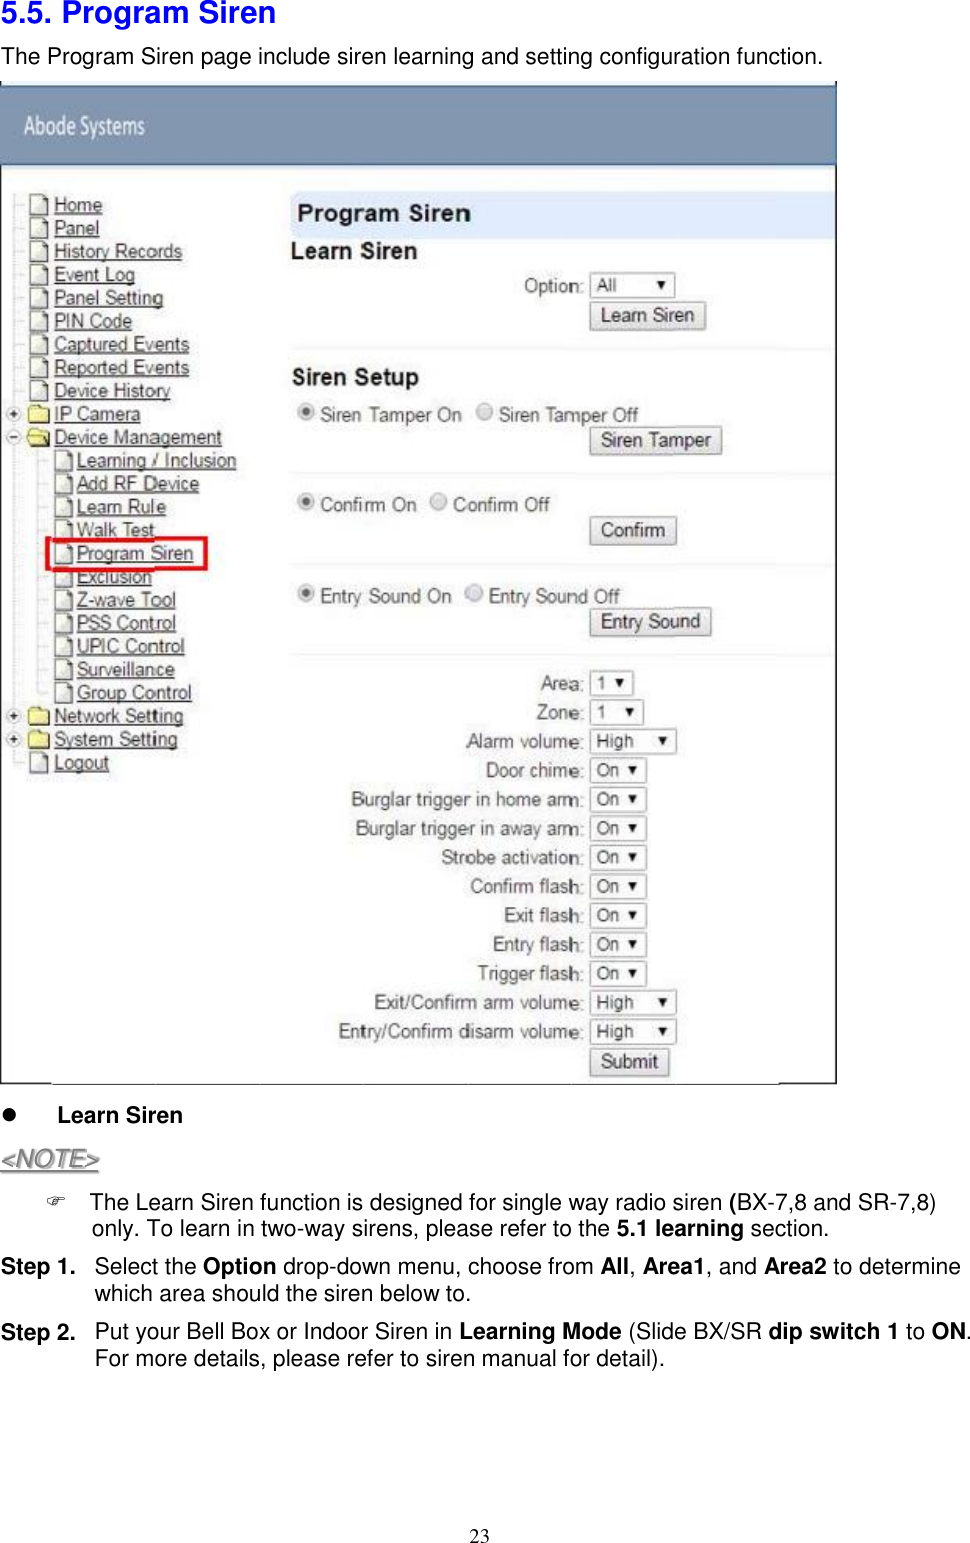 23  5.5. Program Siren The Program Siren page include siren learning and setting configuration function.   Learn Siren Step 1.  Step 2. The Learn Siren function is designed for single way radio siren (BX-7,8 and SR-7,8) only. To learn in two-way sirens, please refer to the 5.1 learning section. Select the Option drop-down menu, choose from All, Area1, and Area2 to determine which area should the siren below to. Put your Bell Box or Indoor Siren in Learning Mode (Slide BX/SR dip switch 1 to ON. For more details, please refer to siren manual for detail). &lt;NOTE&gt; 